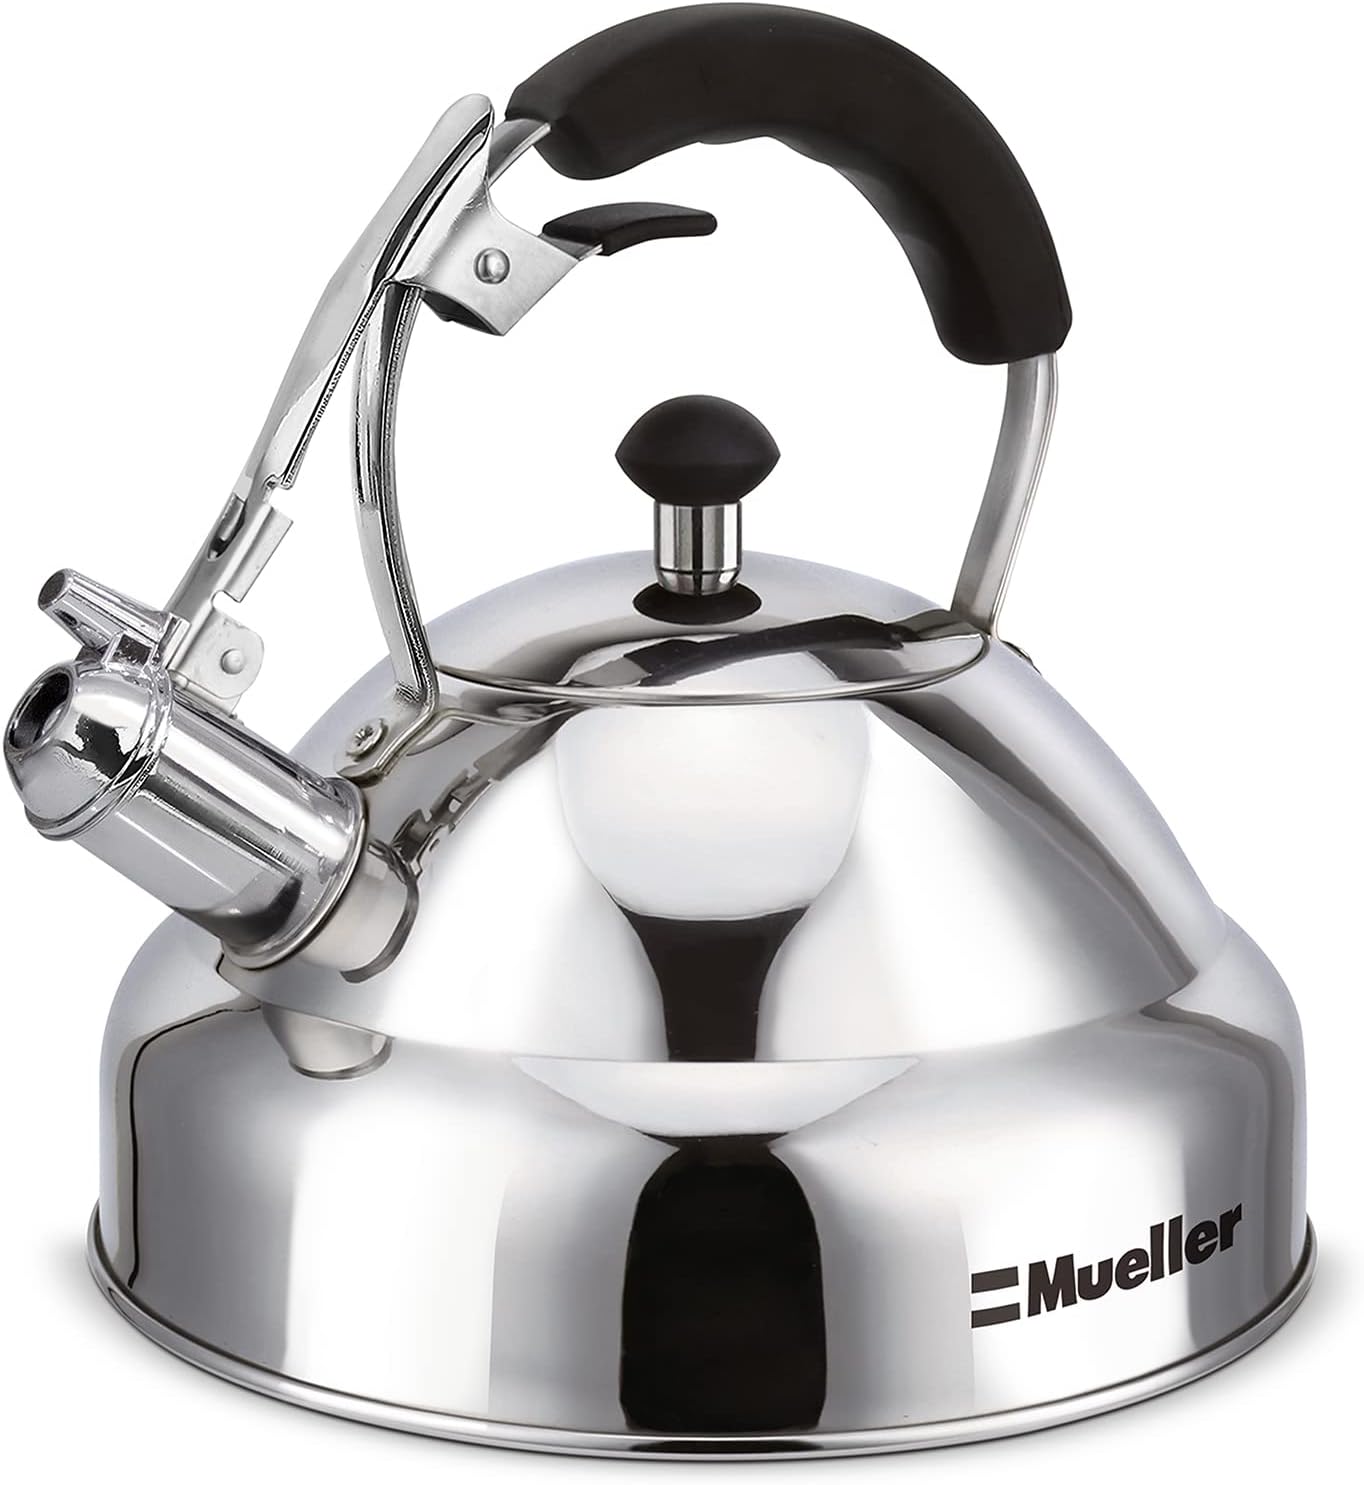 Mueller Austria Stove Top Whistling Tea Kettle - Only Culinary Grade Stainless Steel Teapot with Cool Touch Ergonomic Handle and Straight Pour